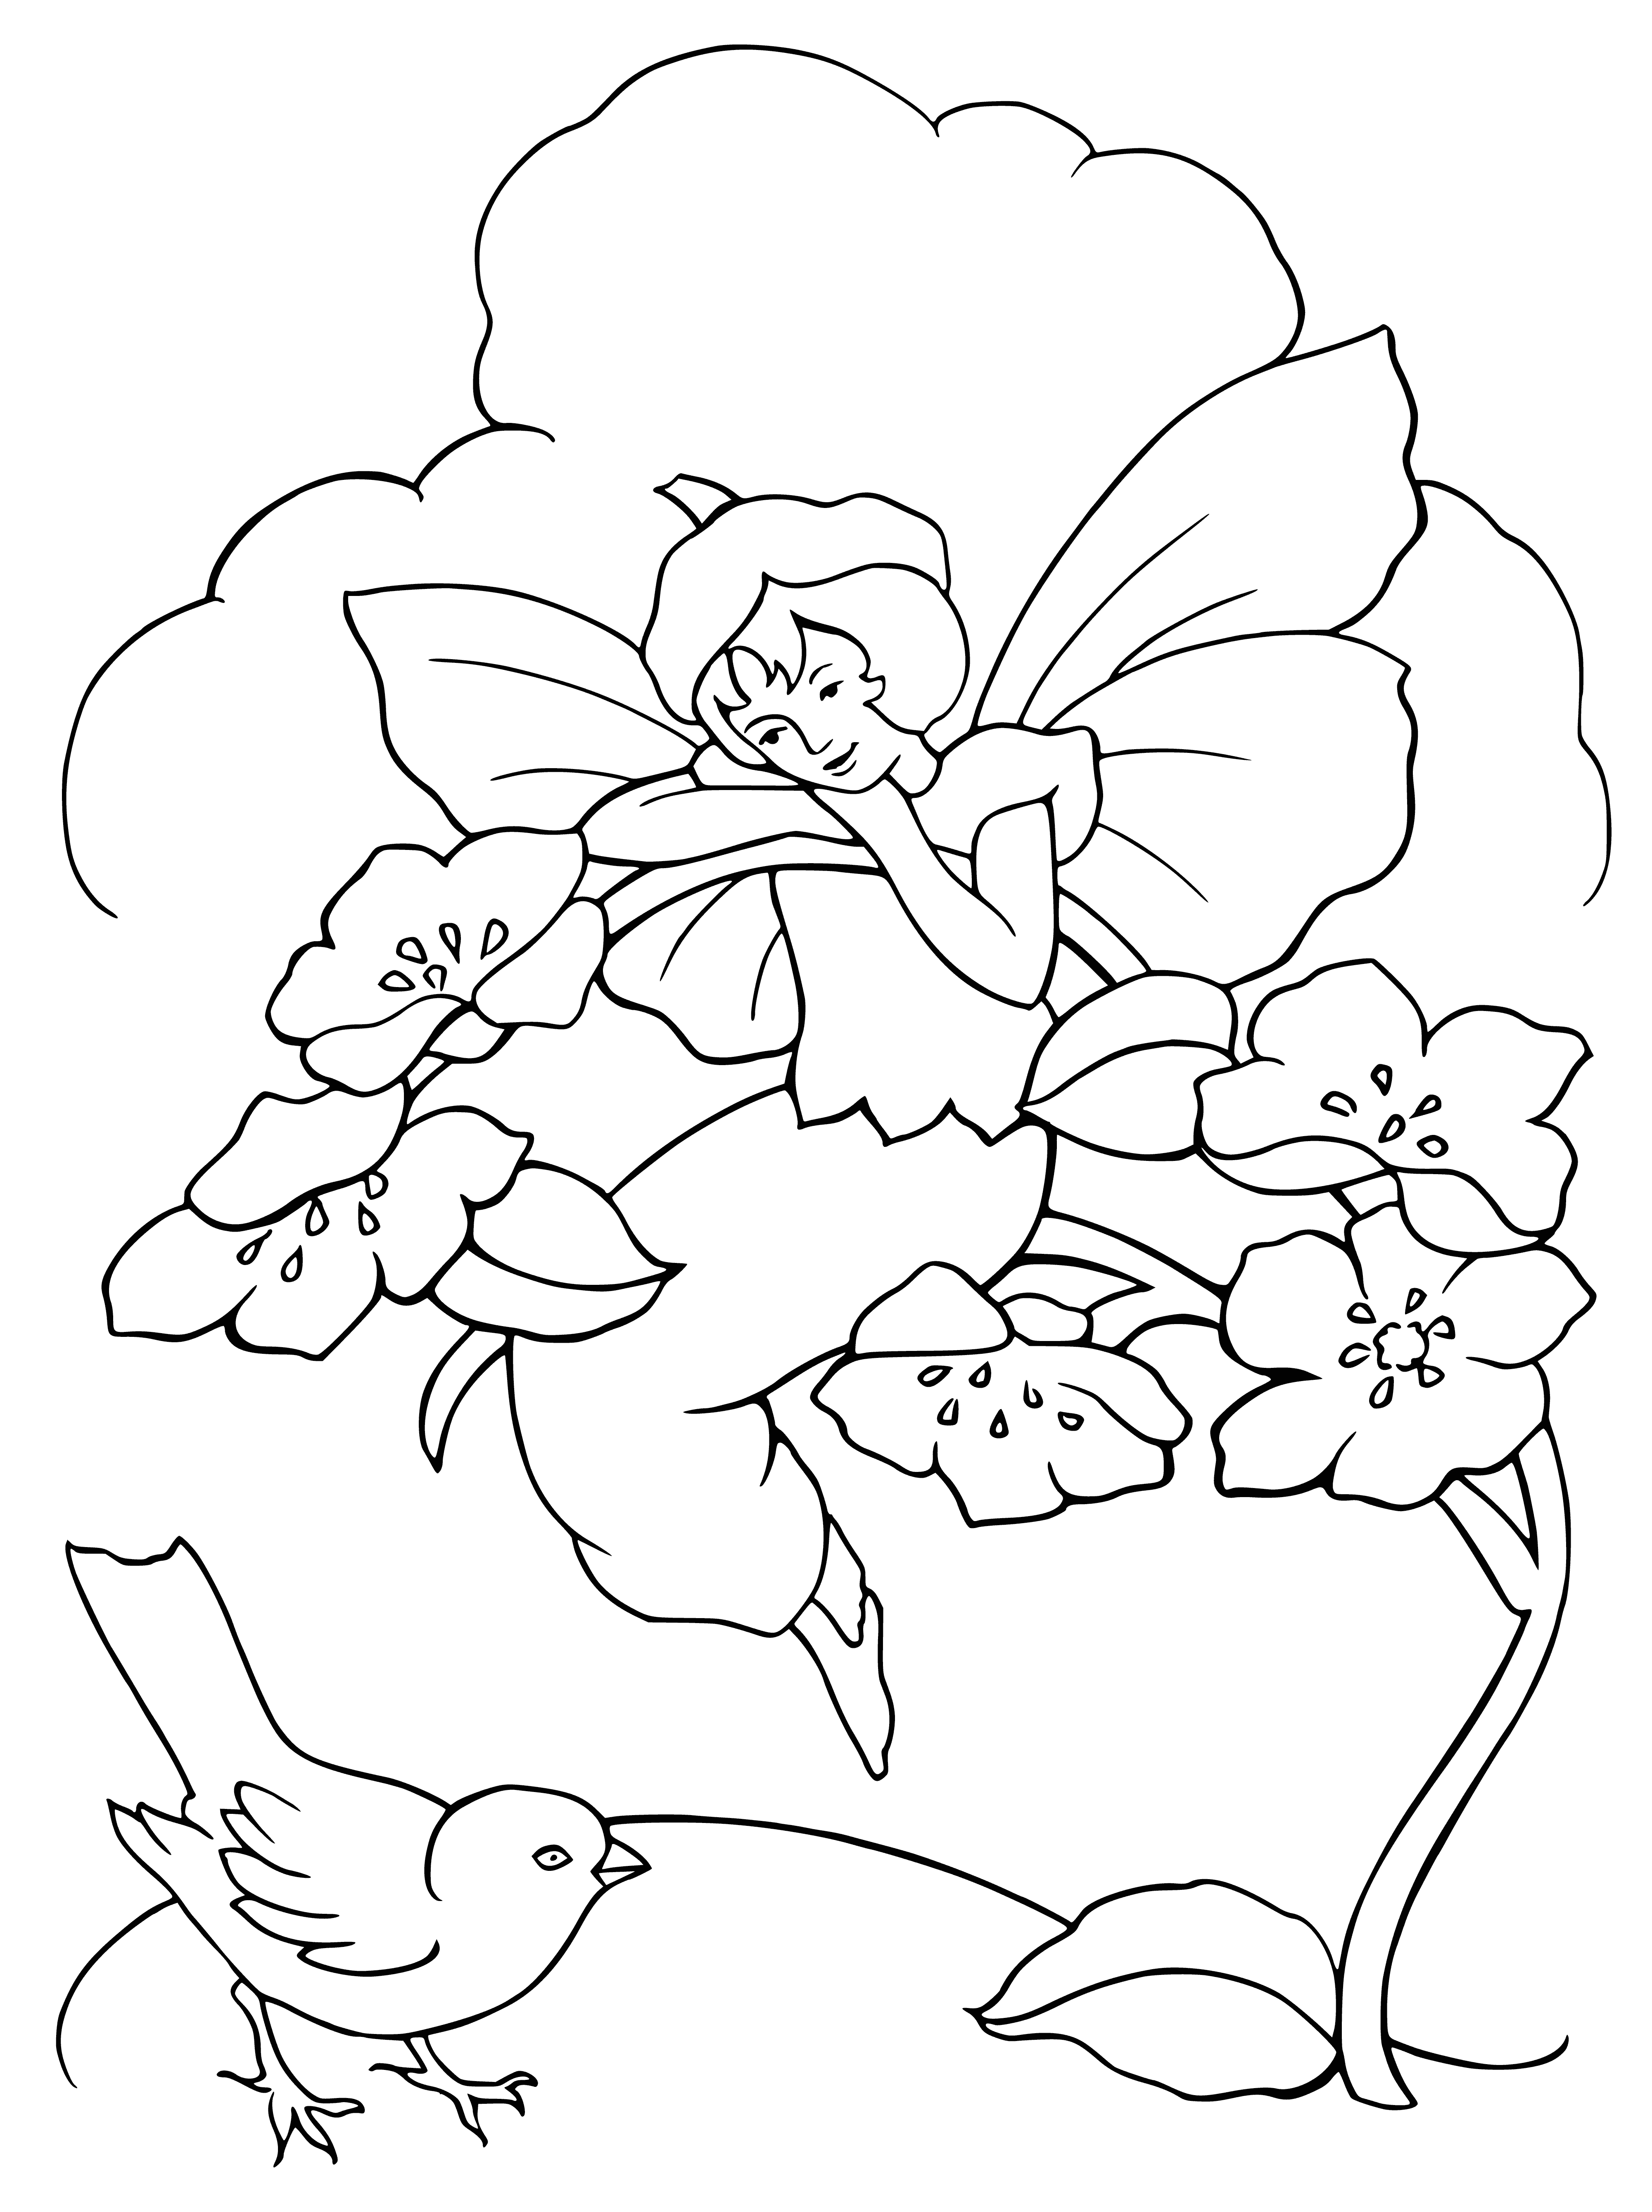 coloring page: Elf girl admires nature; sits on a stump, hair in curls, dress w/ flower print. Butterfly on her hand; trees & flowers in background.